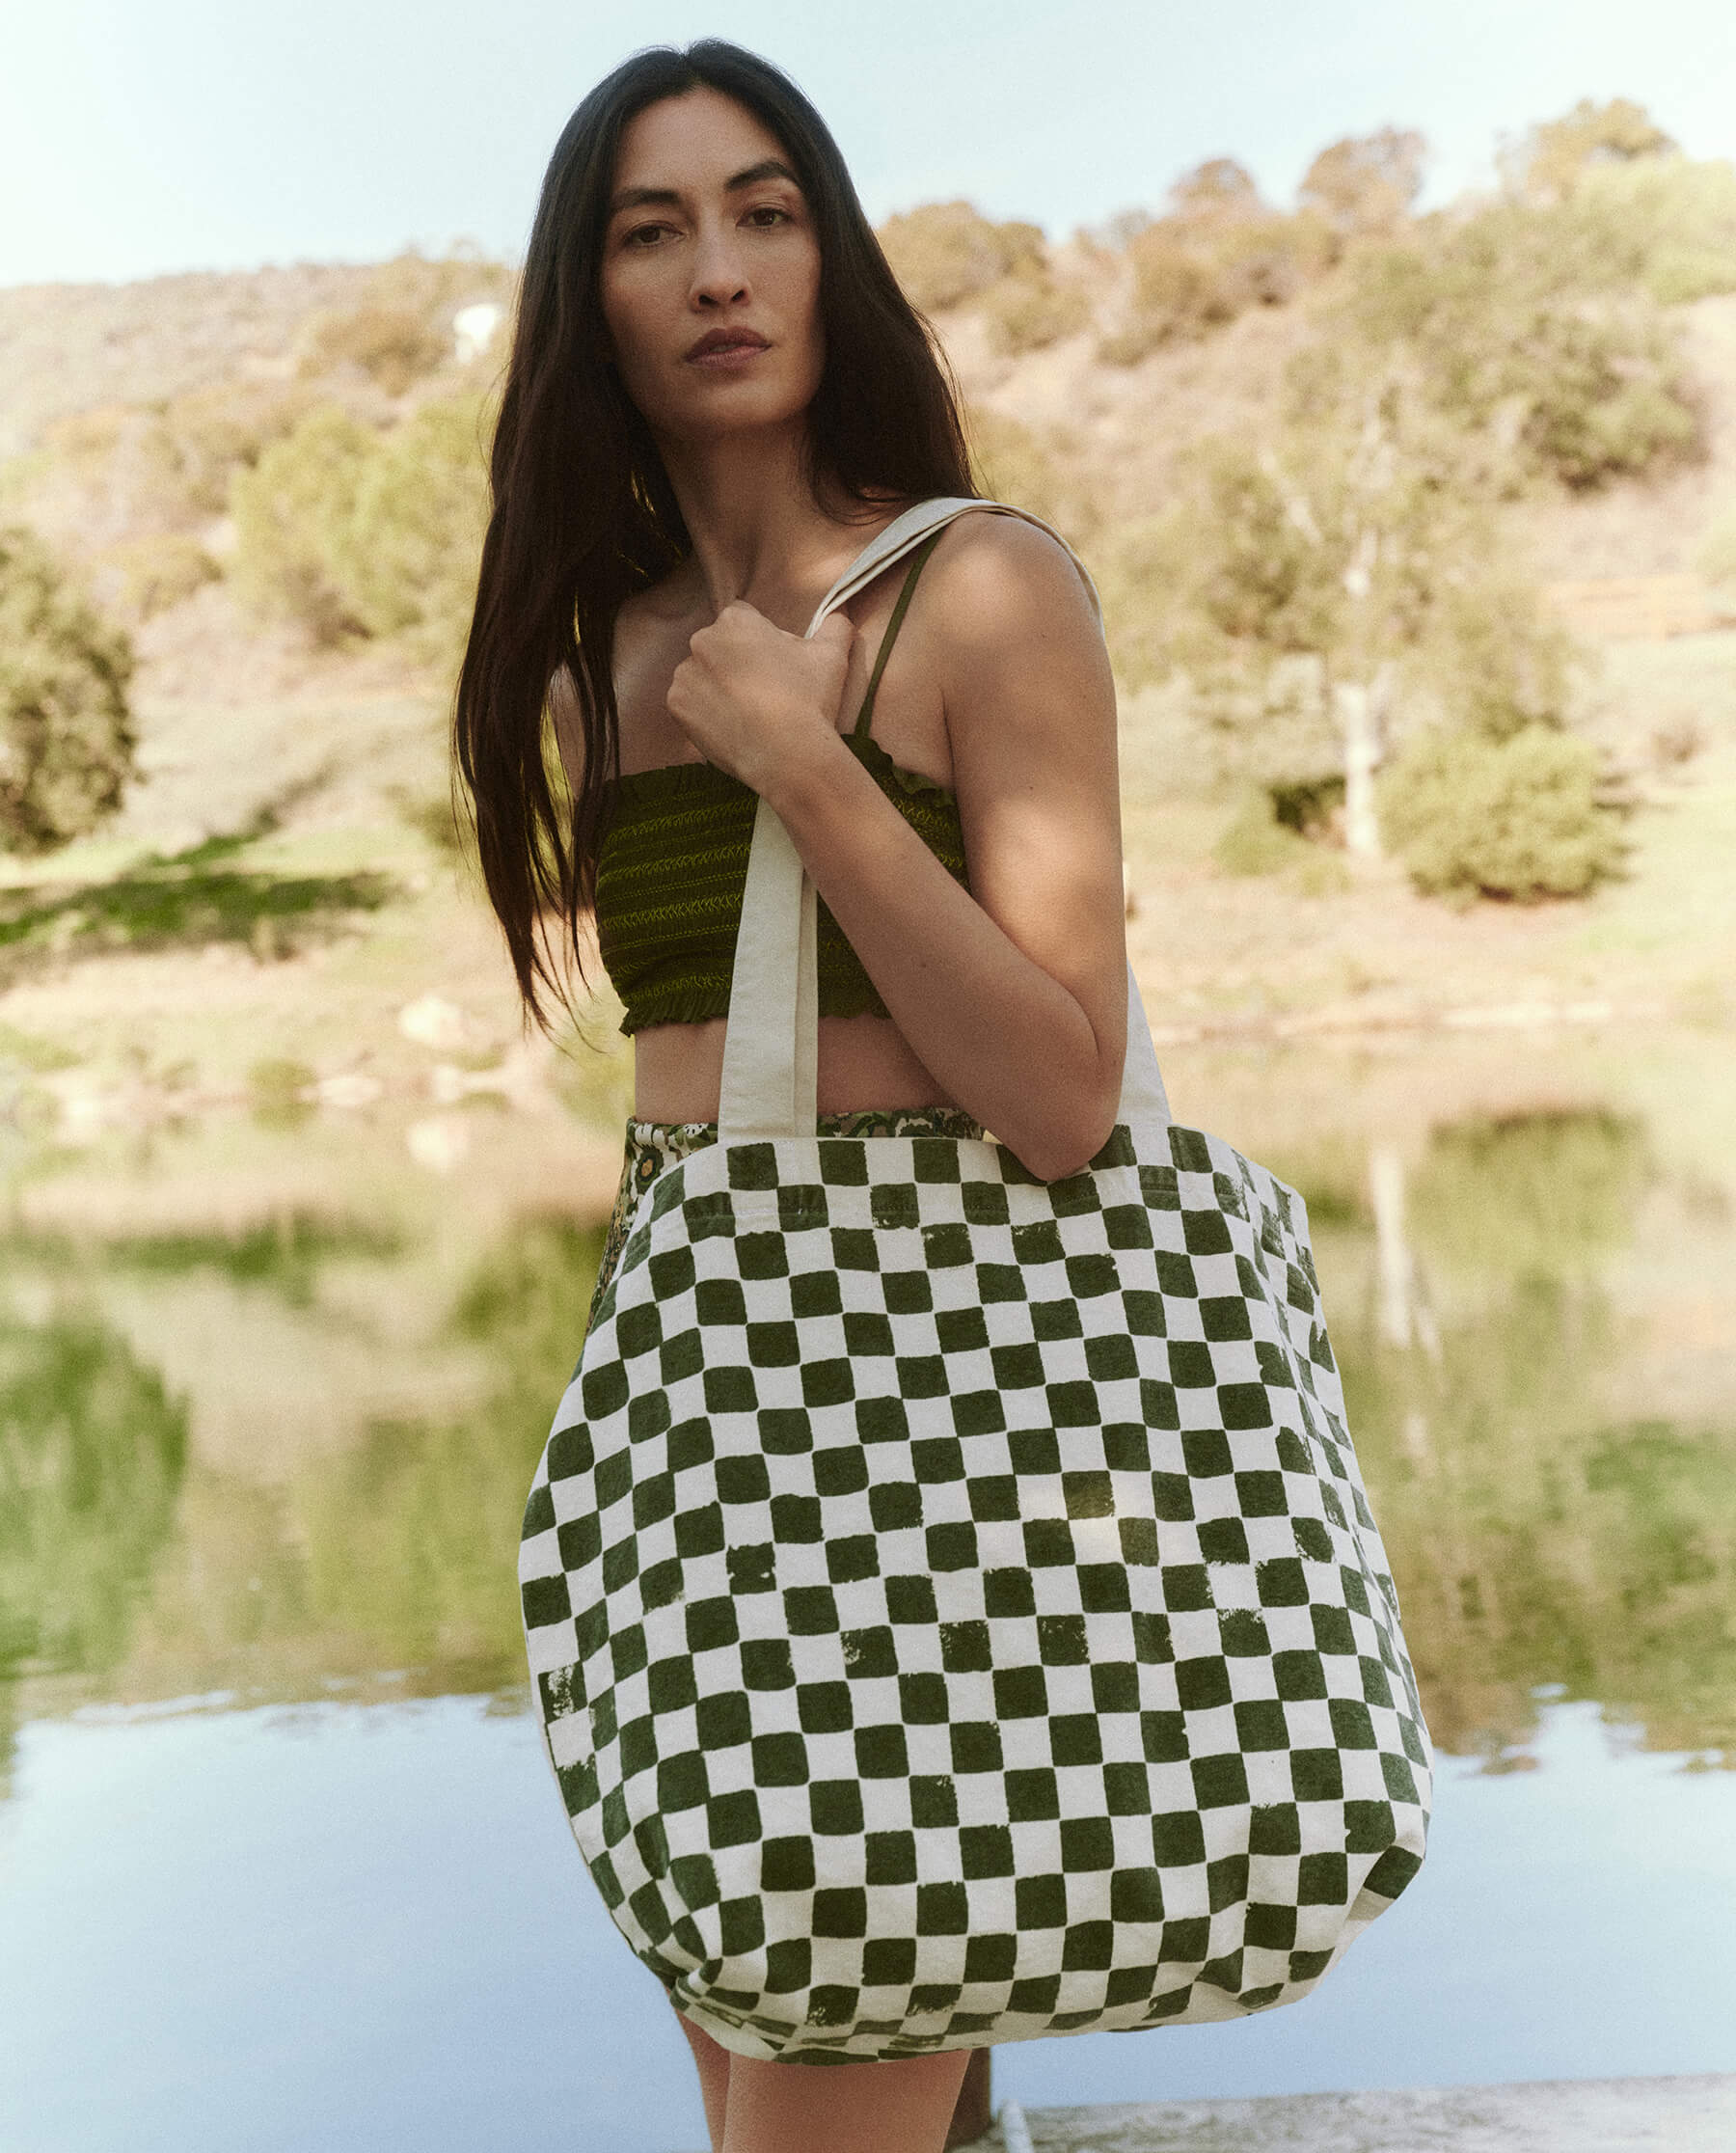 The Beach Tote. -- Cream with Army Check Stamp TOTES THE GREAT. SP23 SWIM